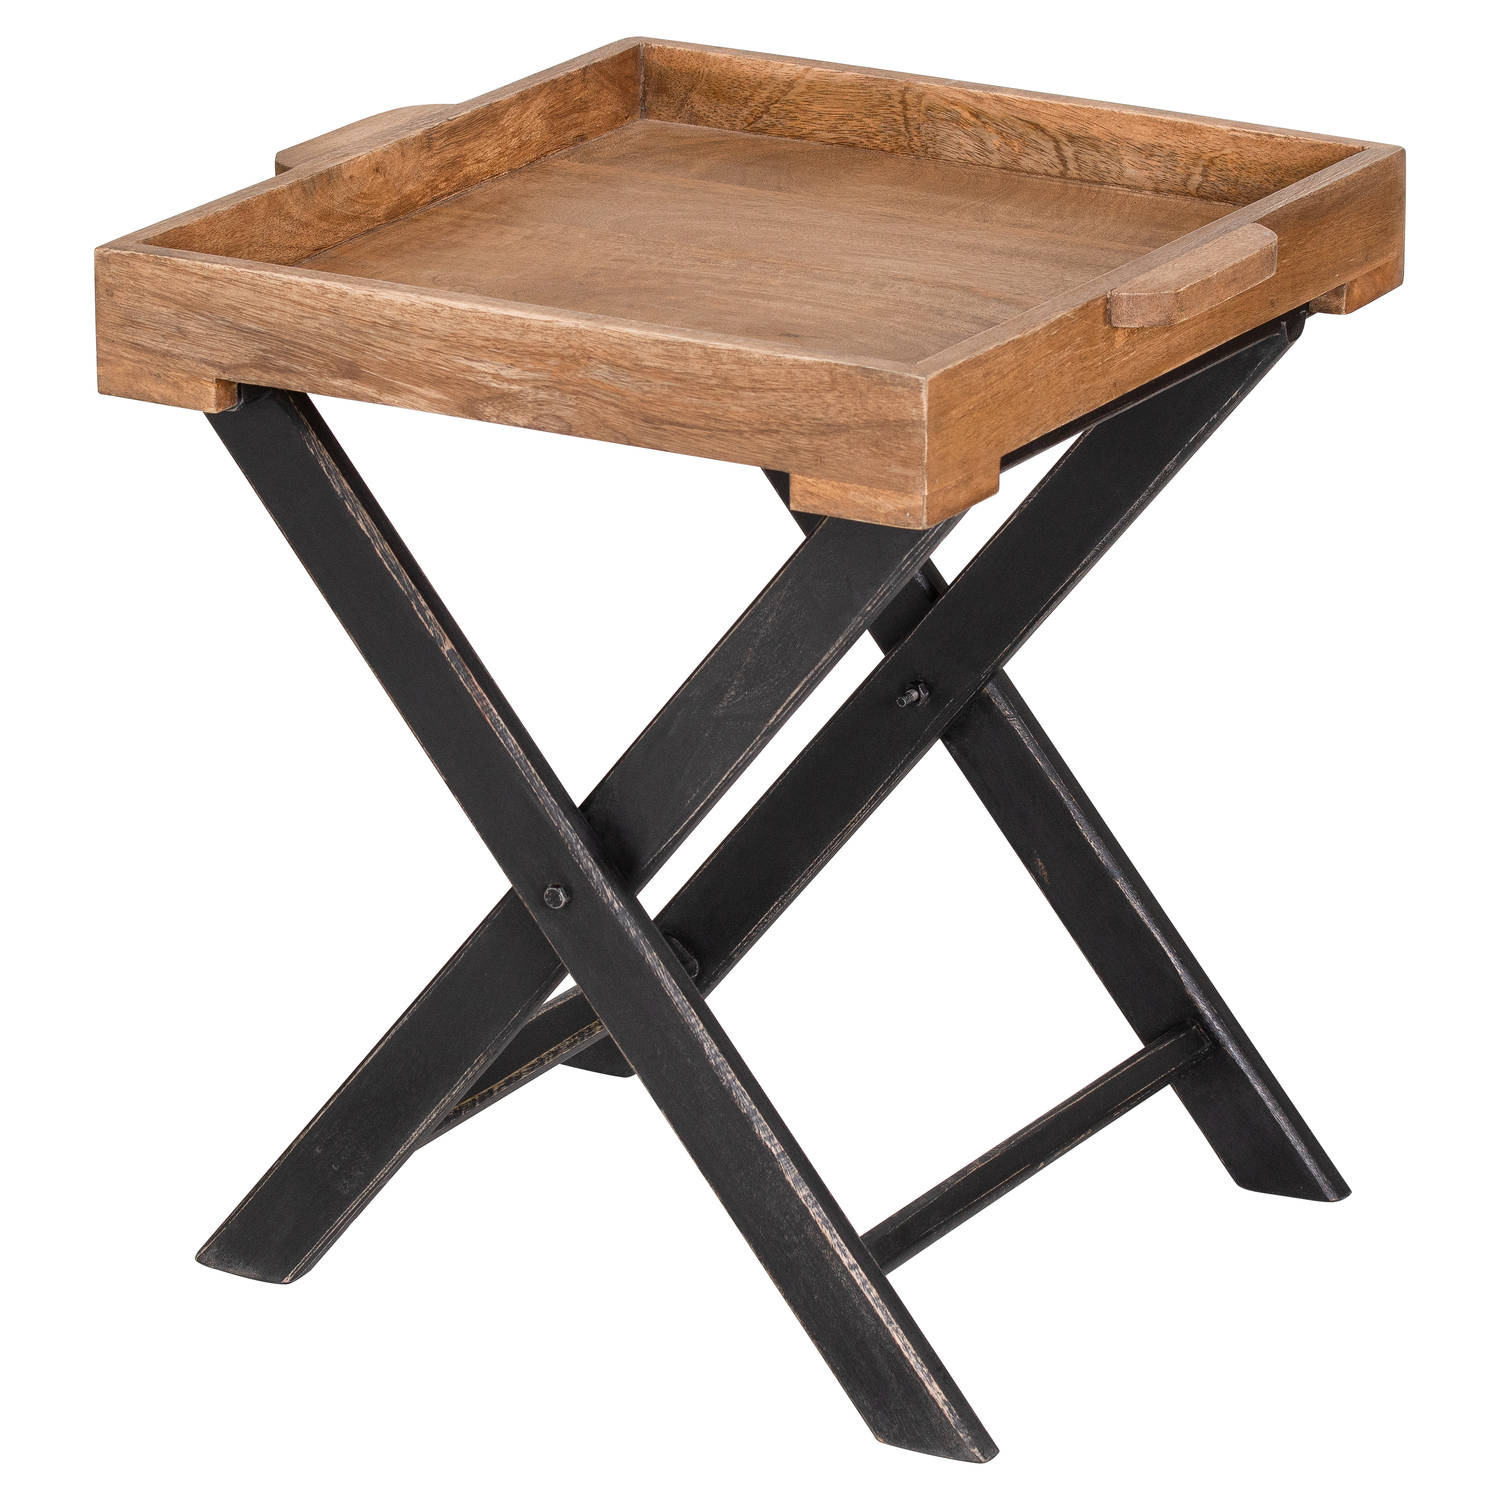 Nordic Collection Medium Butler Table - Image 1